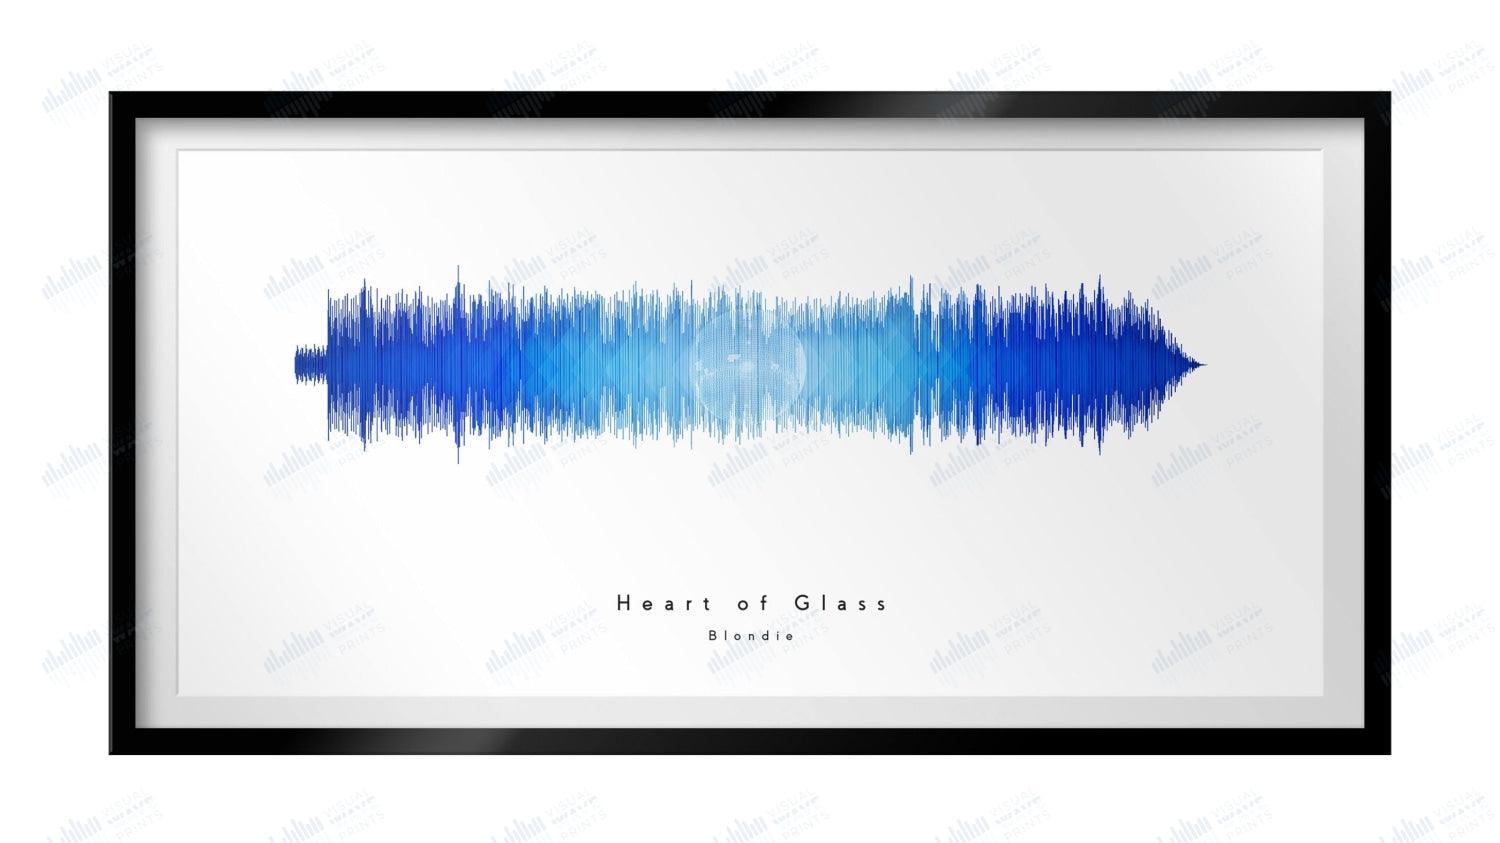 Heart of Glass by Blondie - Visual Wave Prints